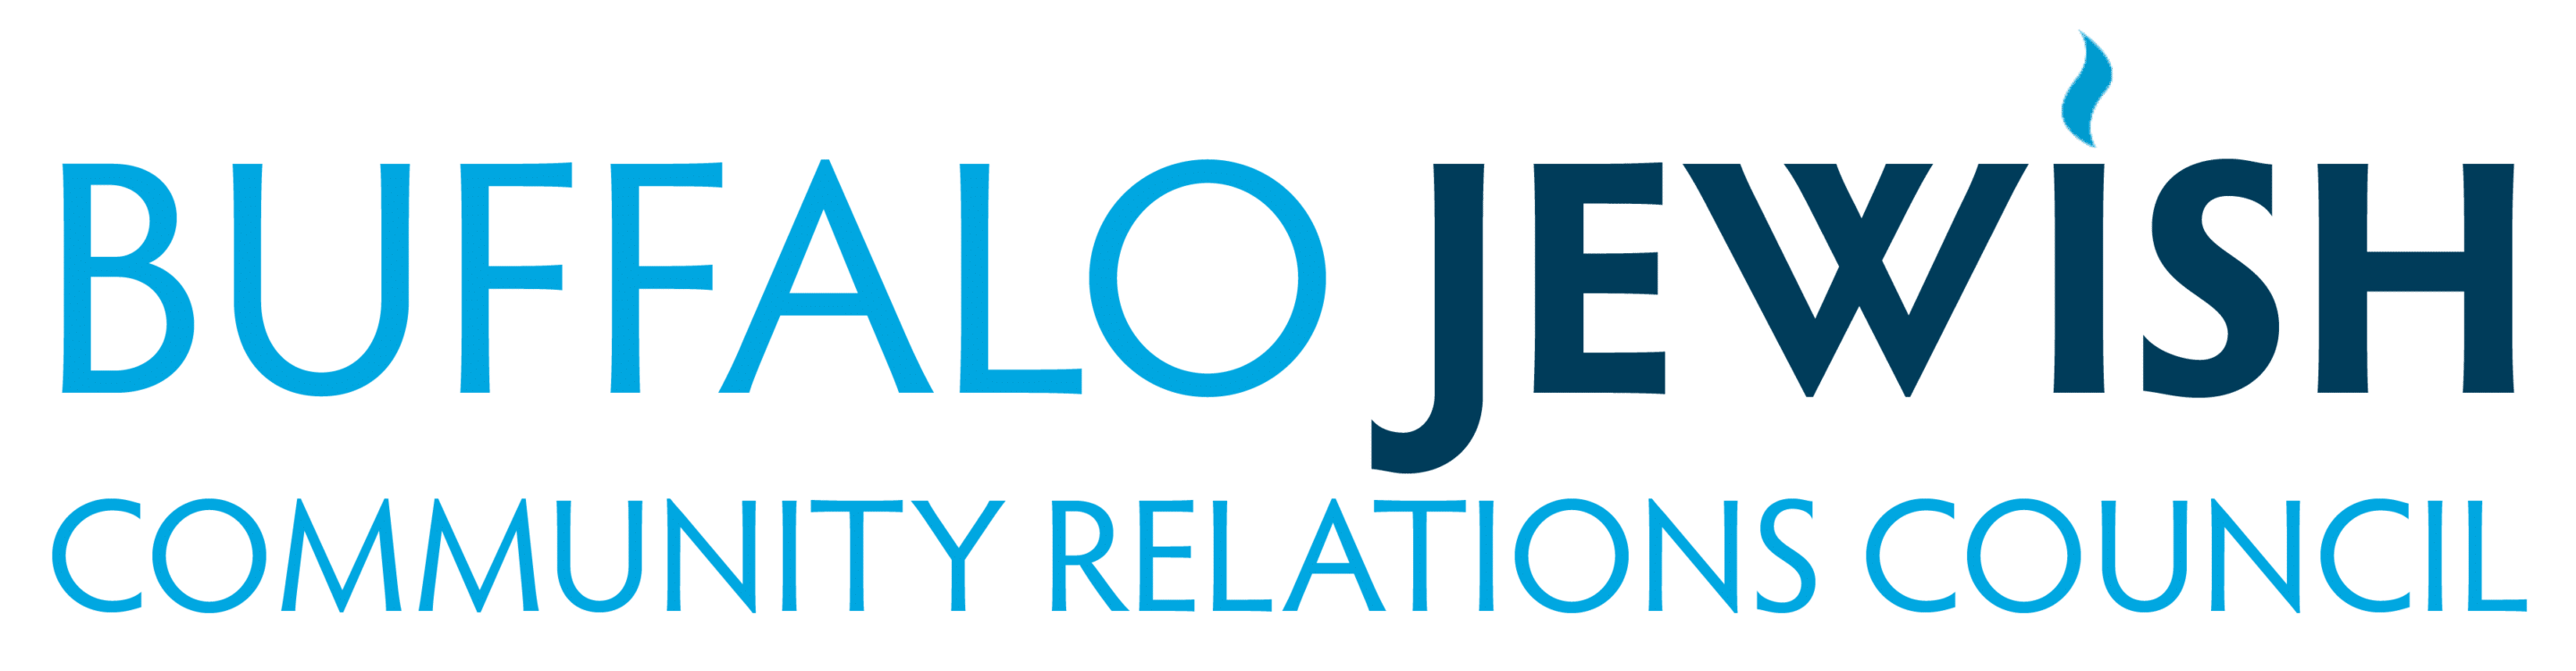 Connections Newsletter - Buffalo JCRC Logo 1